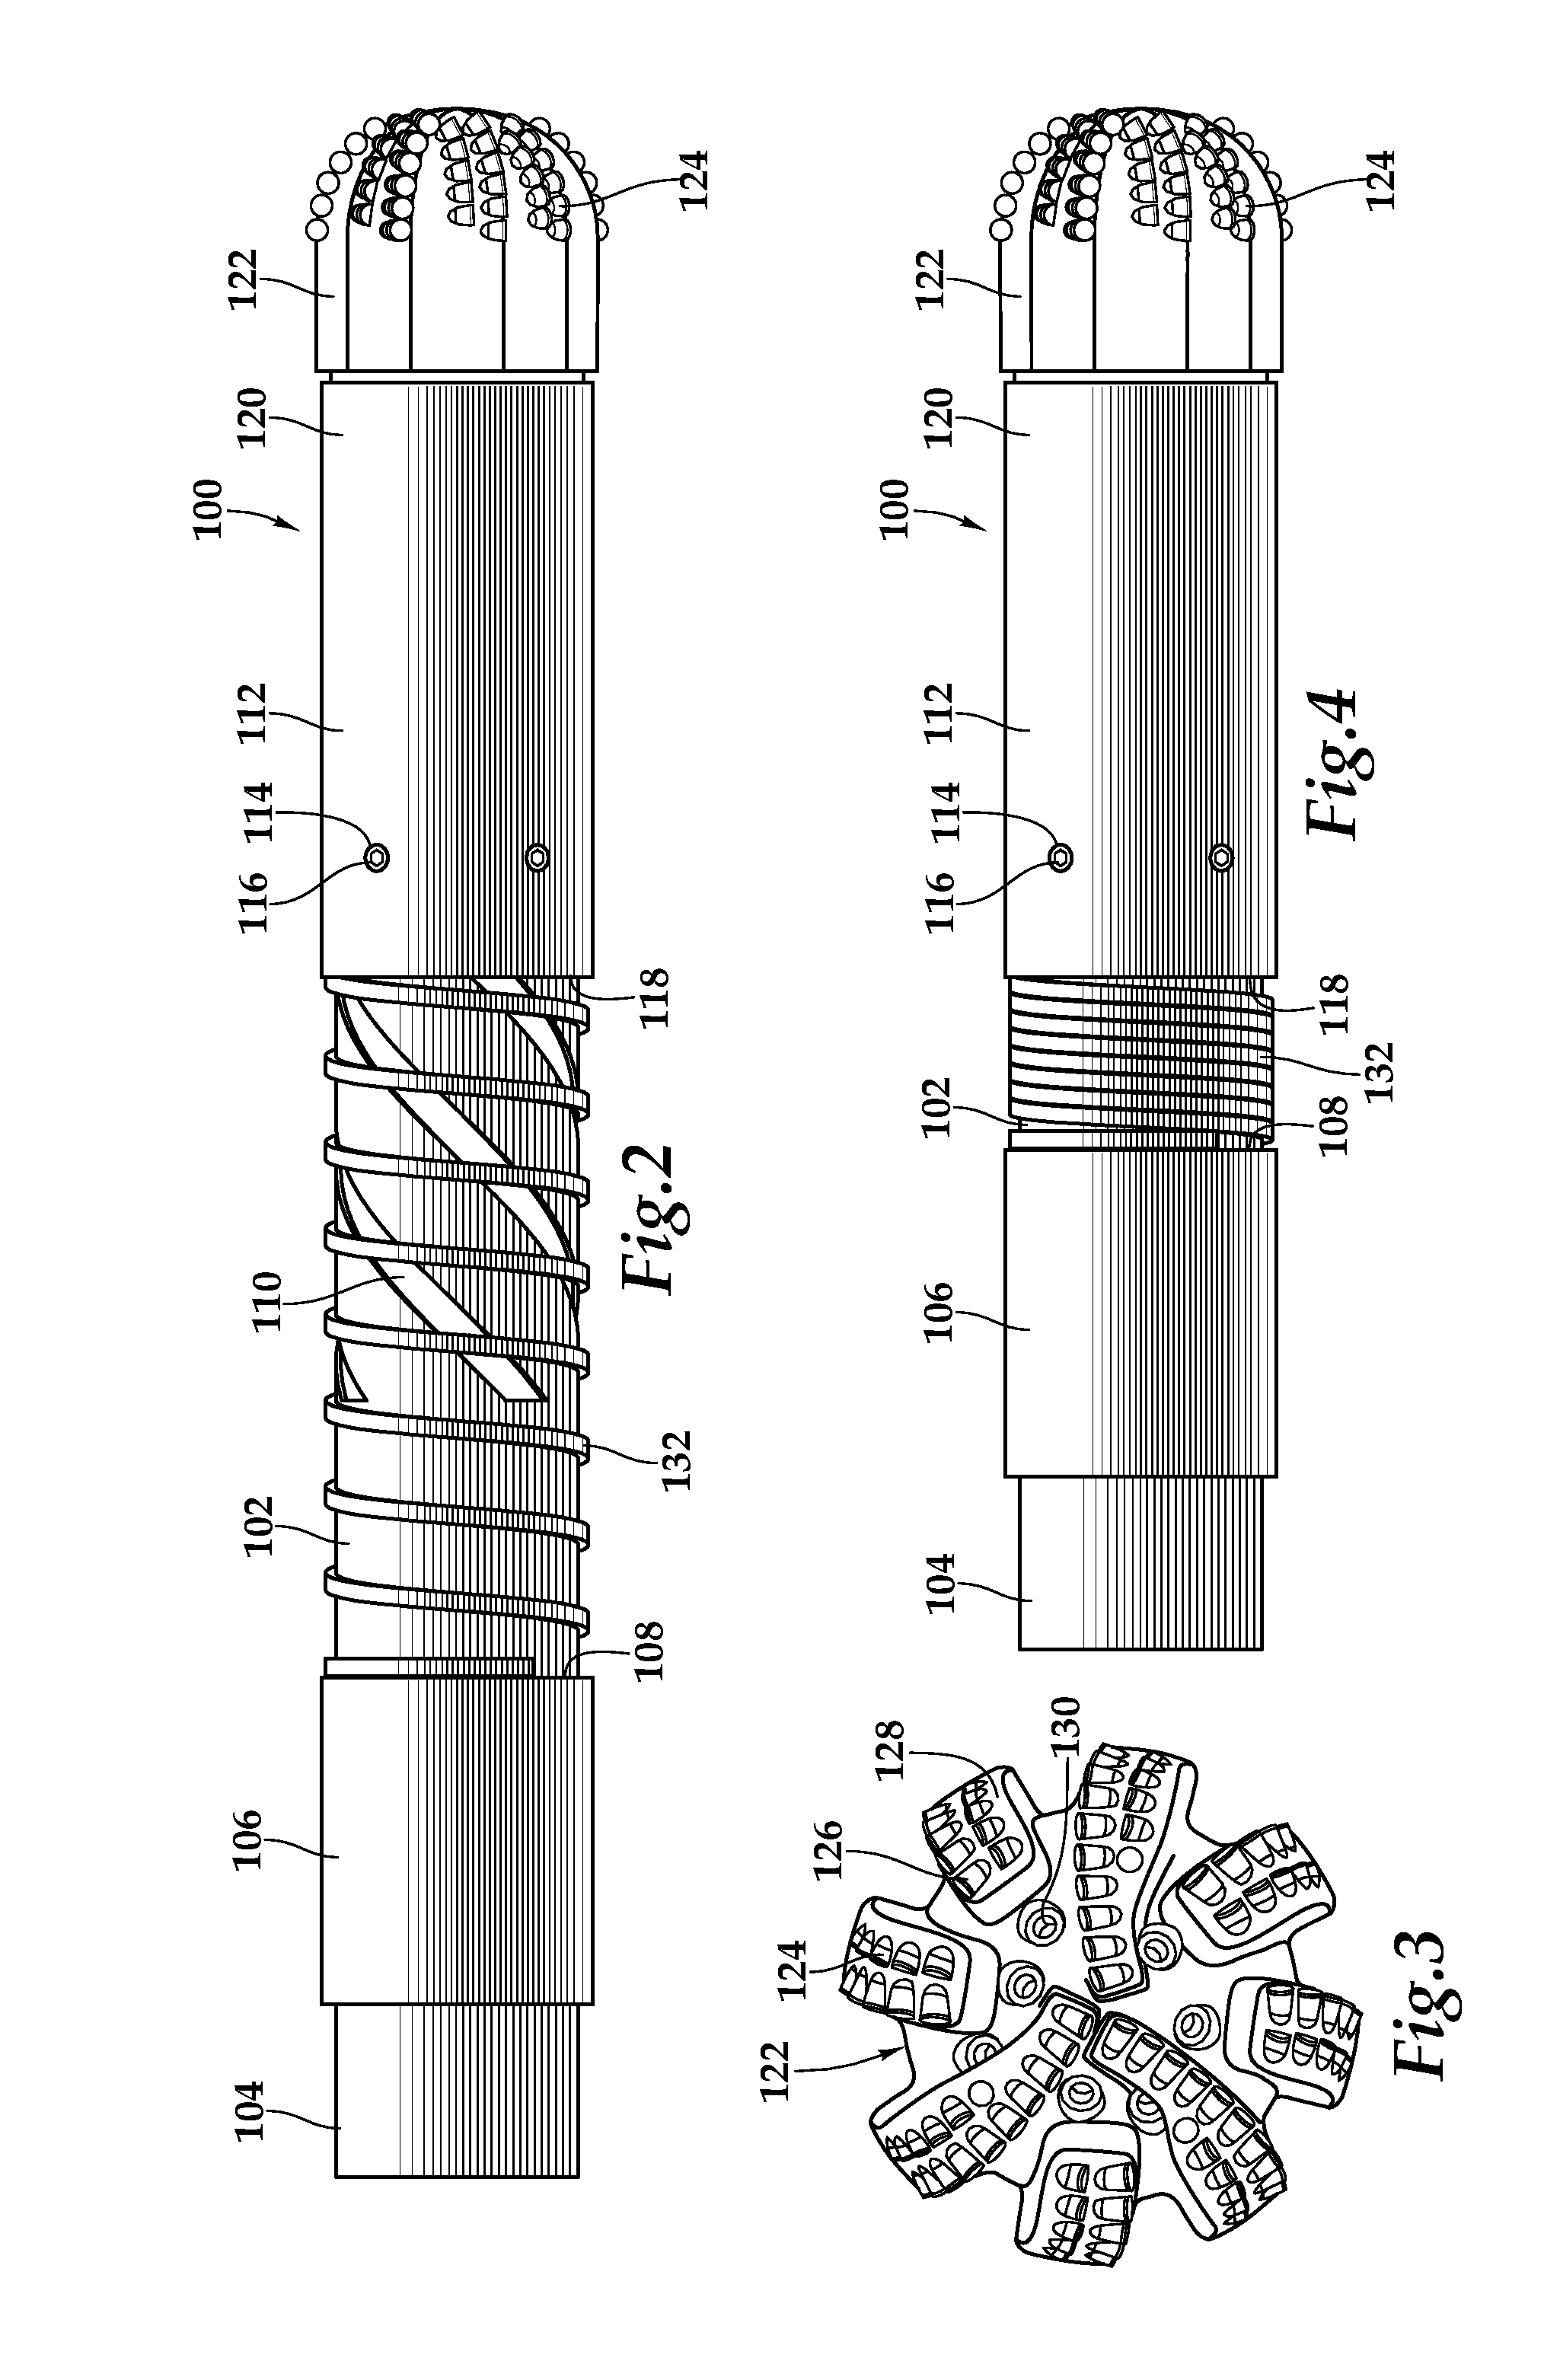 Apparatus and Method for Reaming a Wellbore During the Installation of a Tubular String